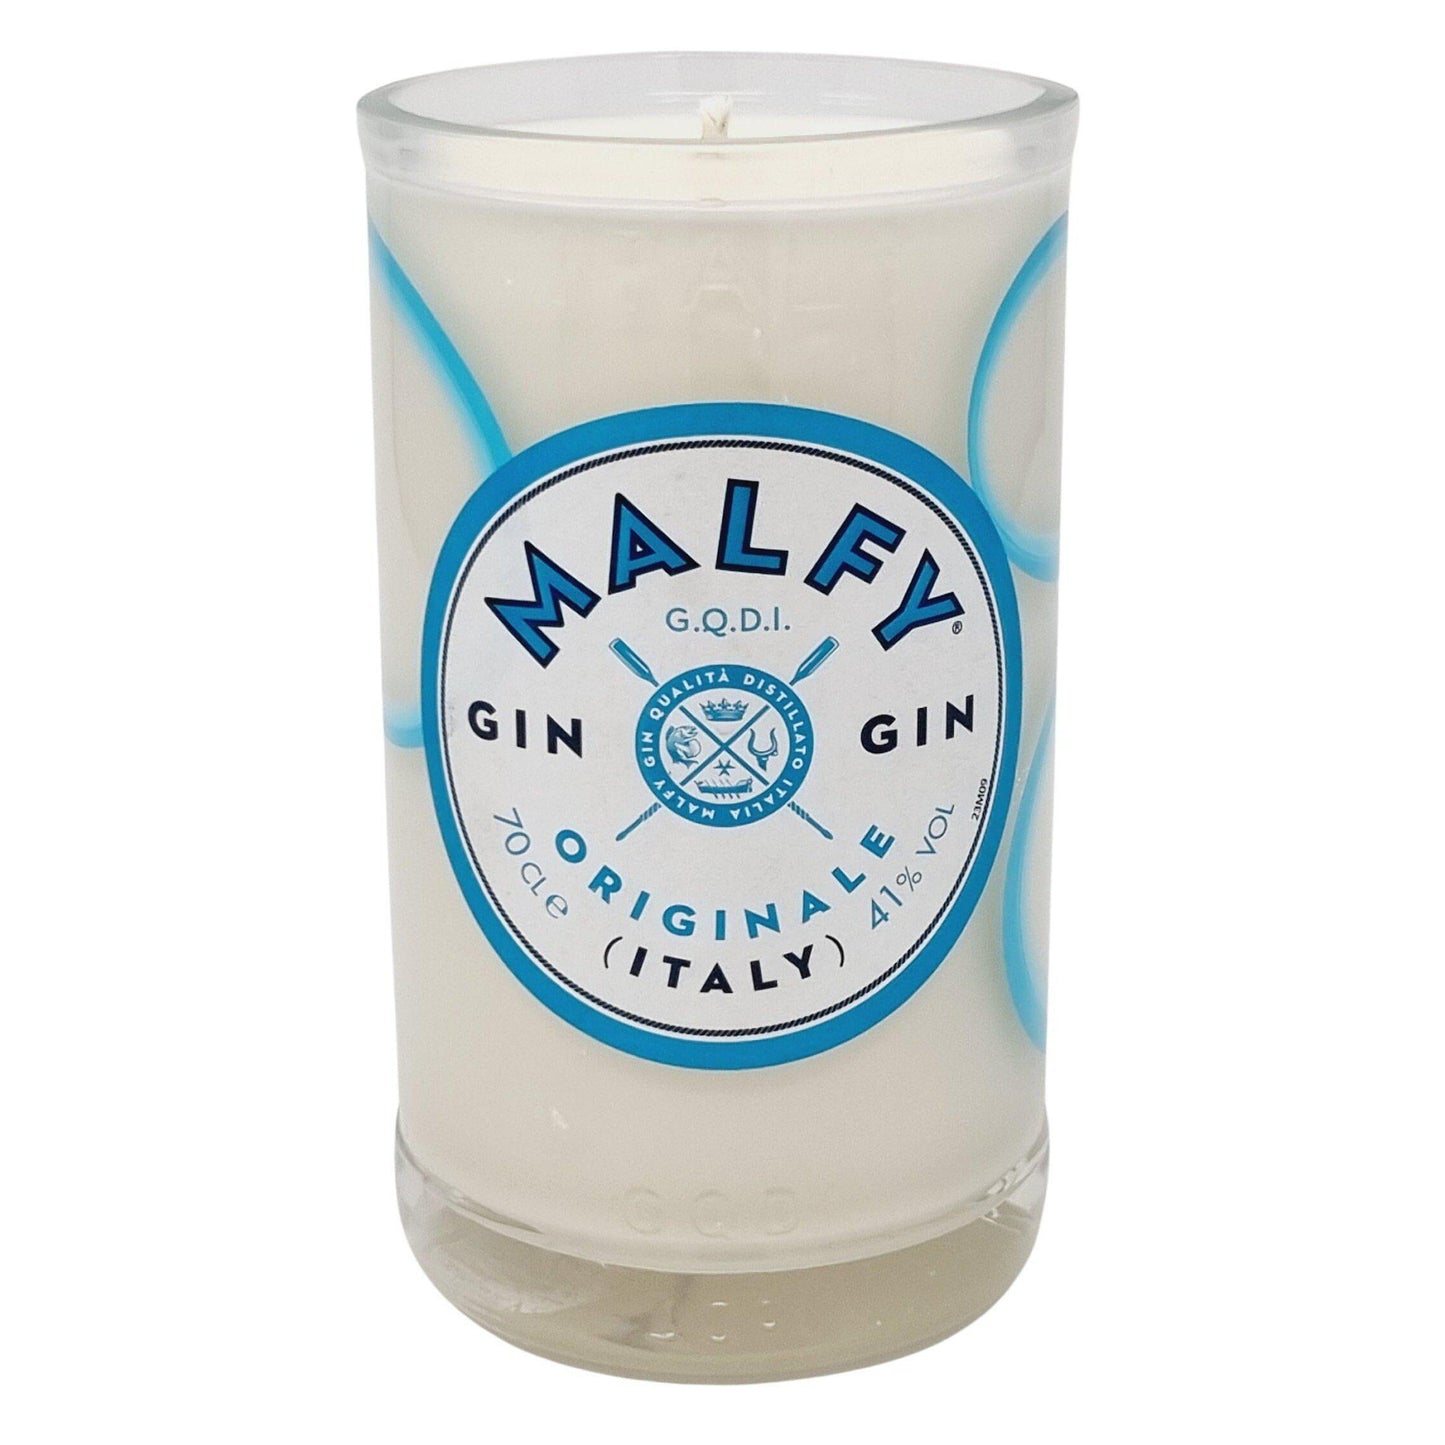 Malfy Gin Originale Bottle Candle Gin Bottle Candles Adhock Homeware